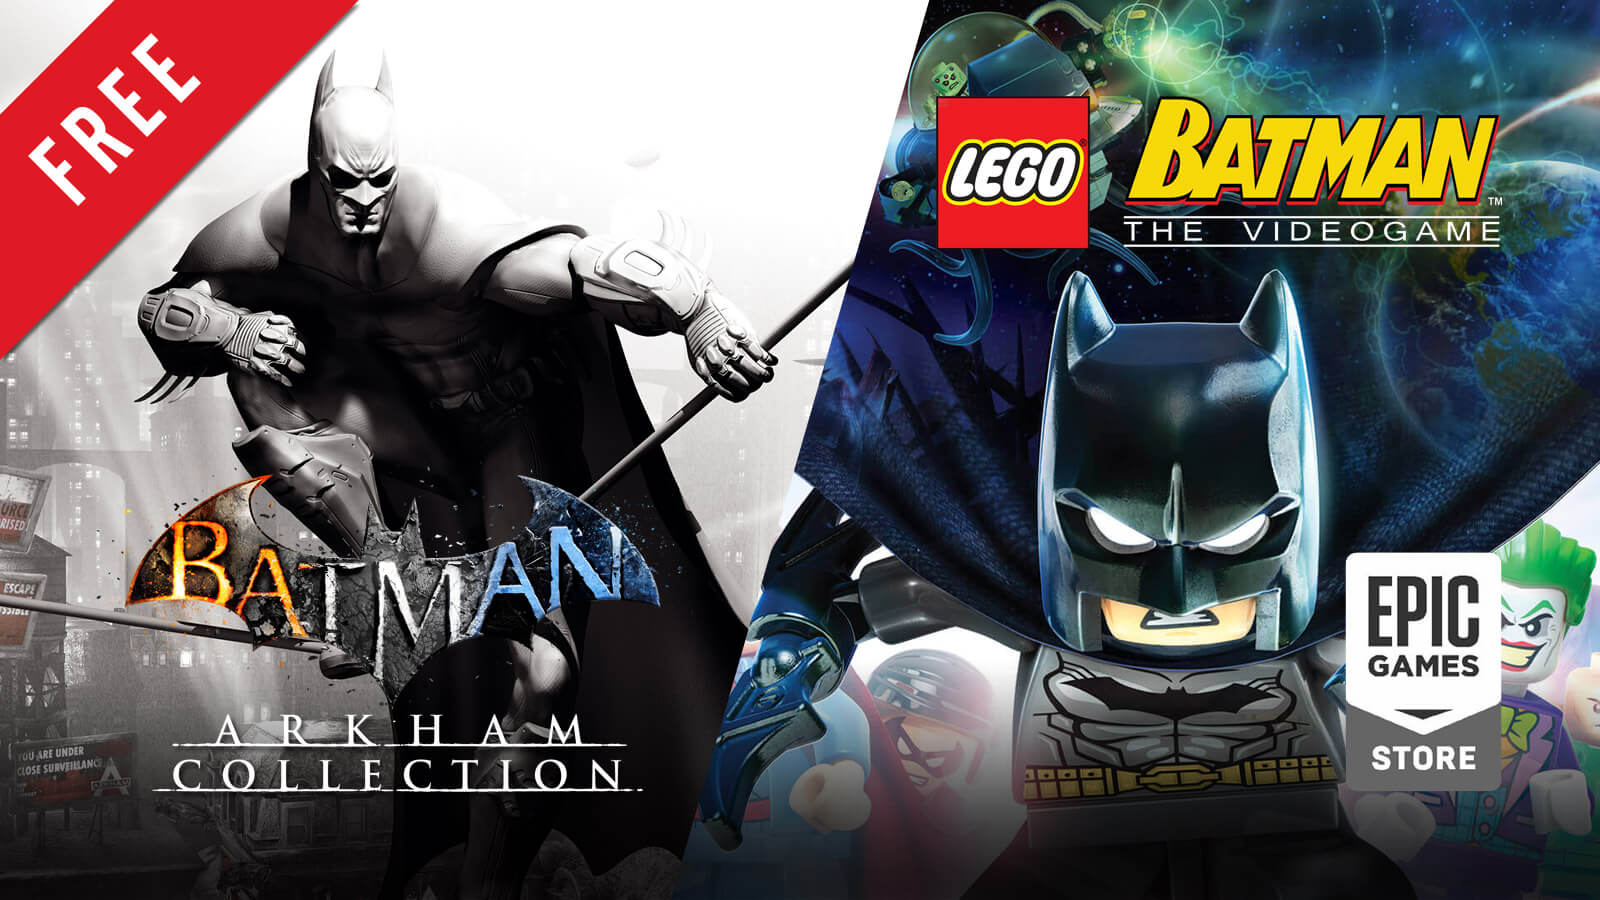 Batman Games Collection Free on Epic Games Store Now